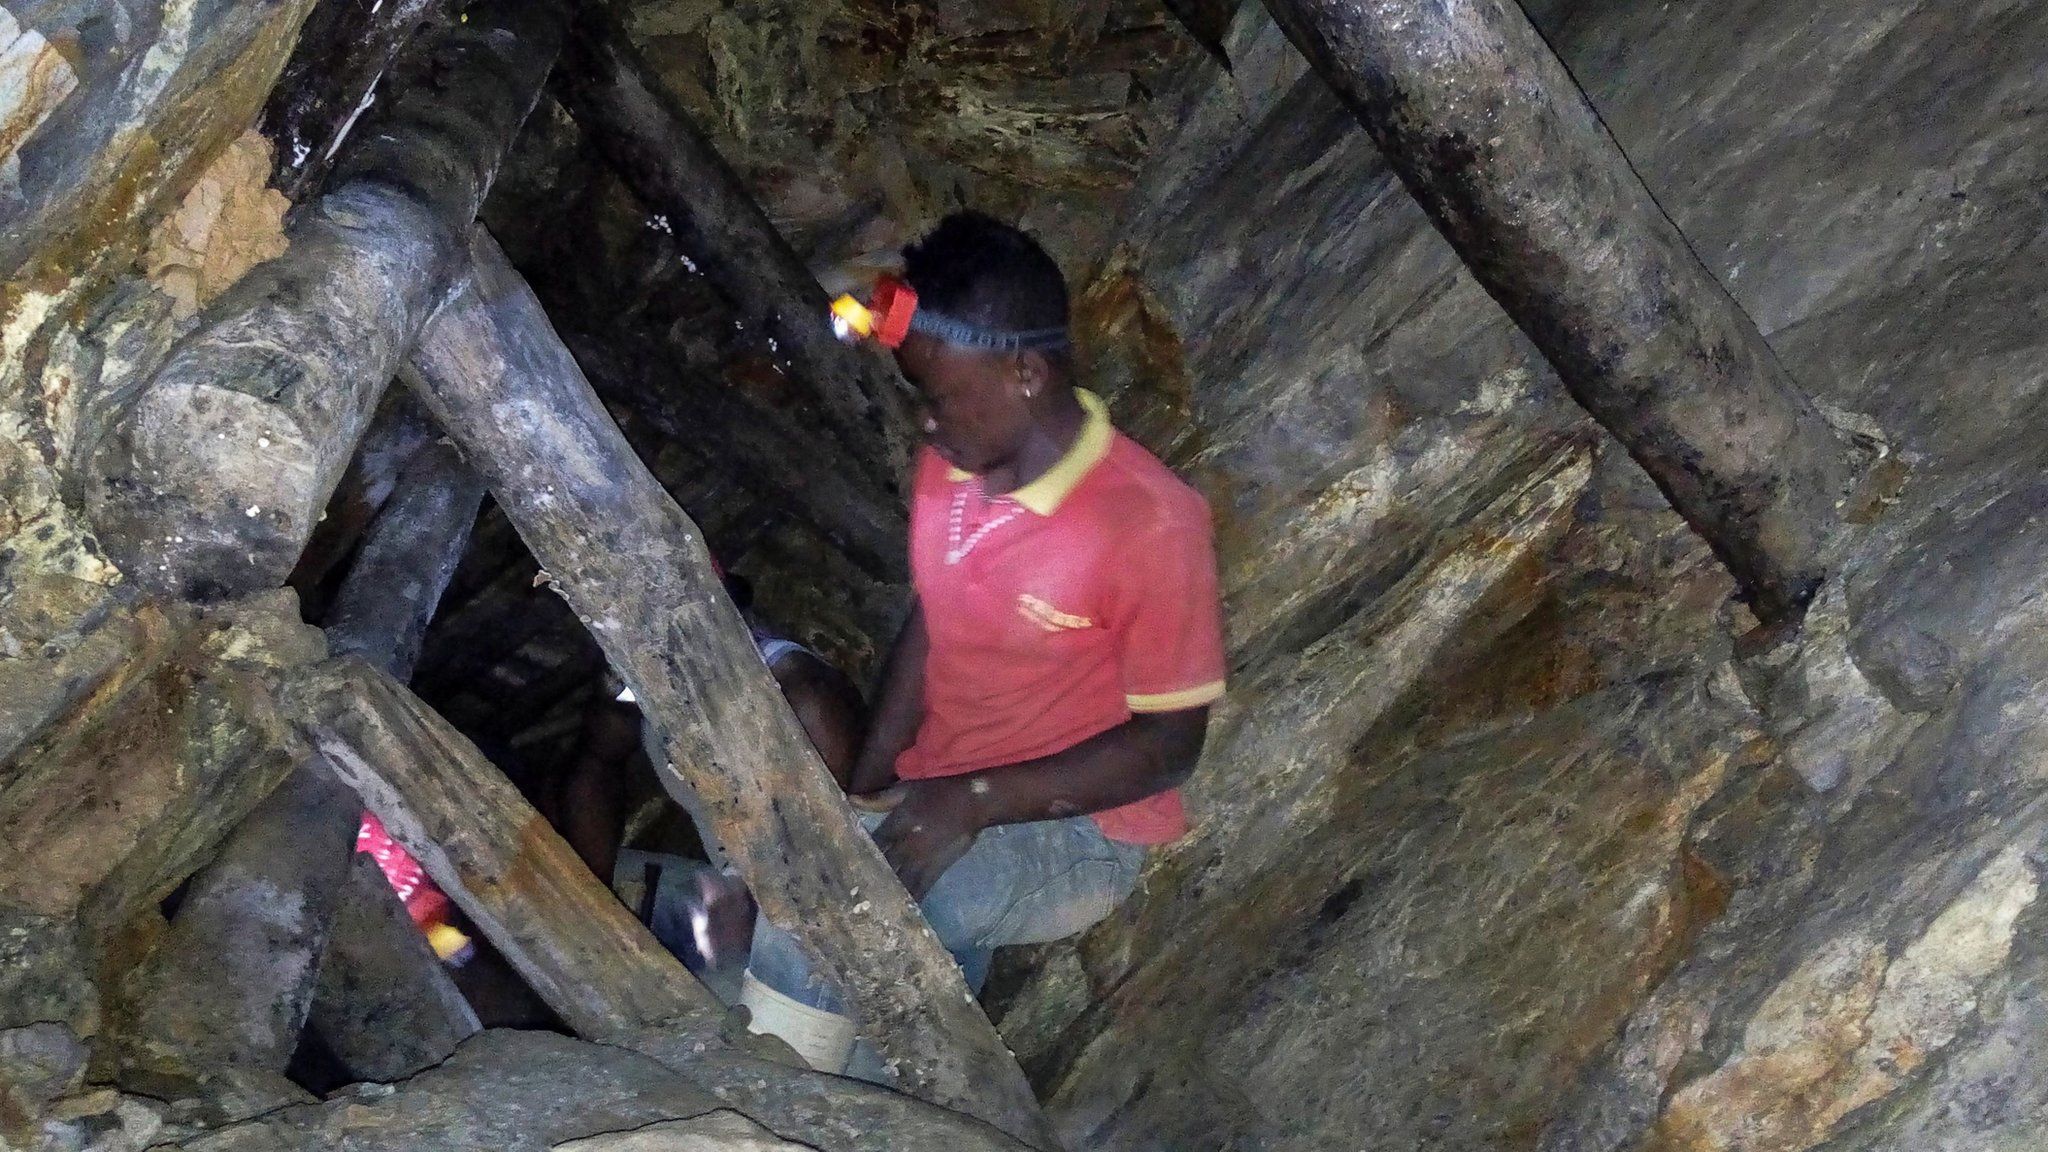 File photo: A Congolese miner works at an artisanal gold mine near Kamituga in the east of the Democratic Republic of Congo, August 1, 2018